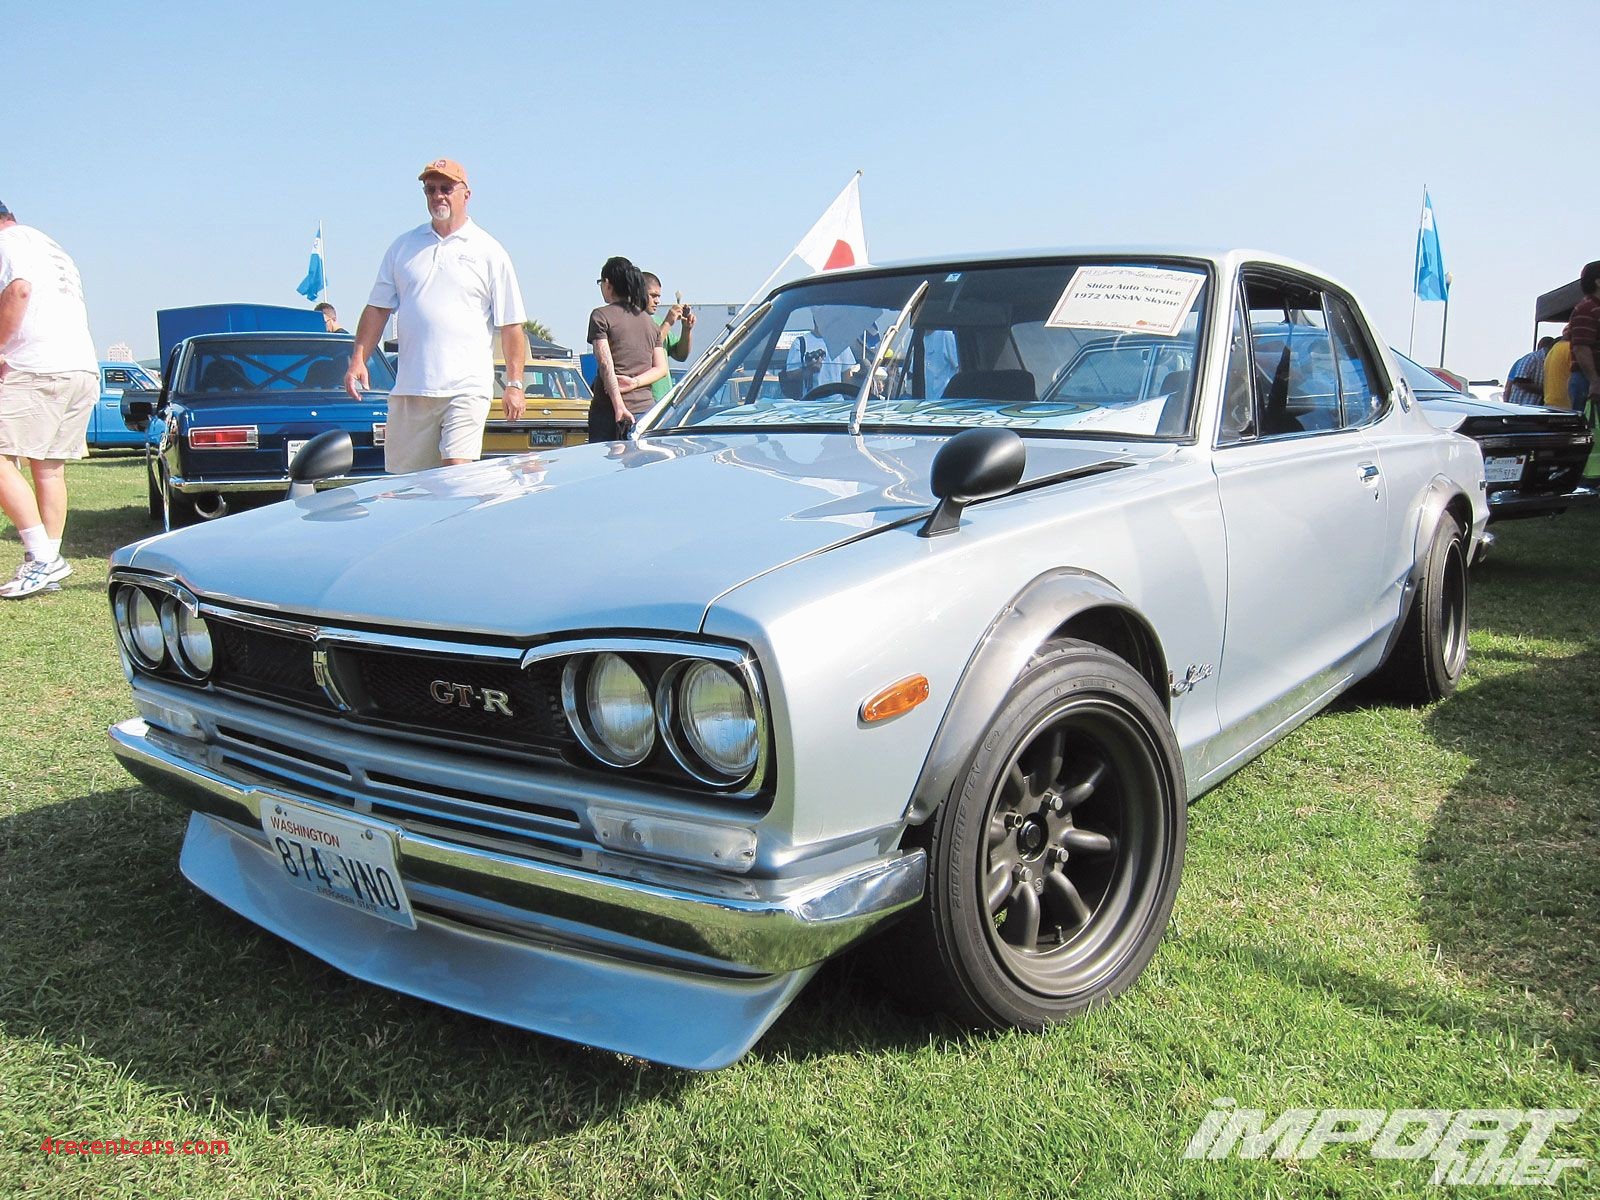 classic-cars-nissan-new-jccs-japanese-classic-cars-invade-long-beach-411-import-tuner-of-classic-cars-nissan.jpg